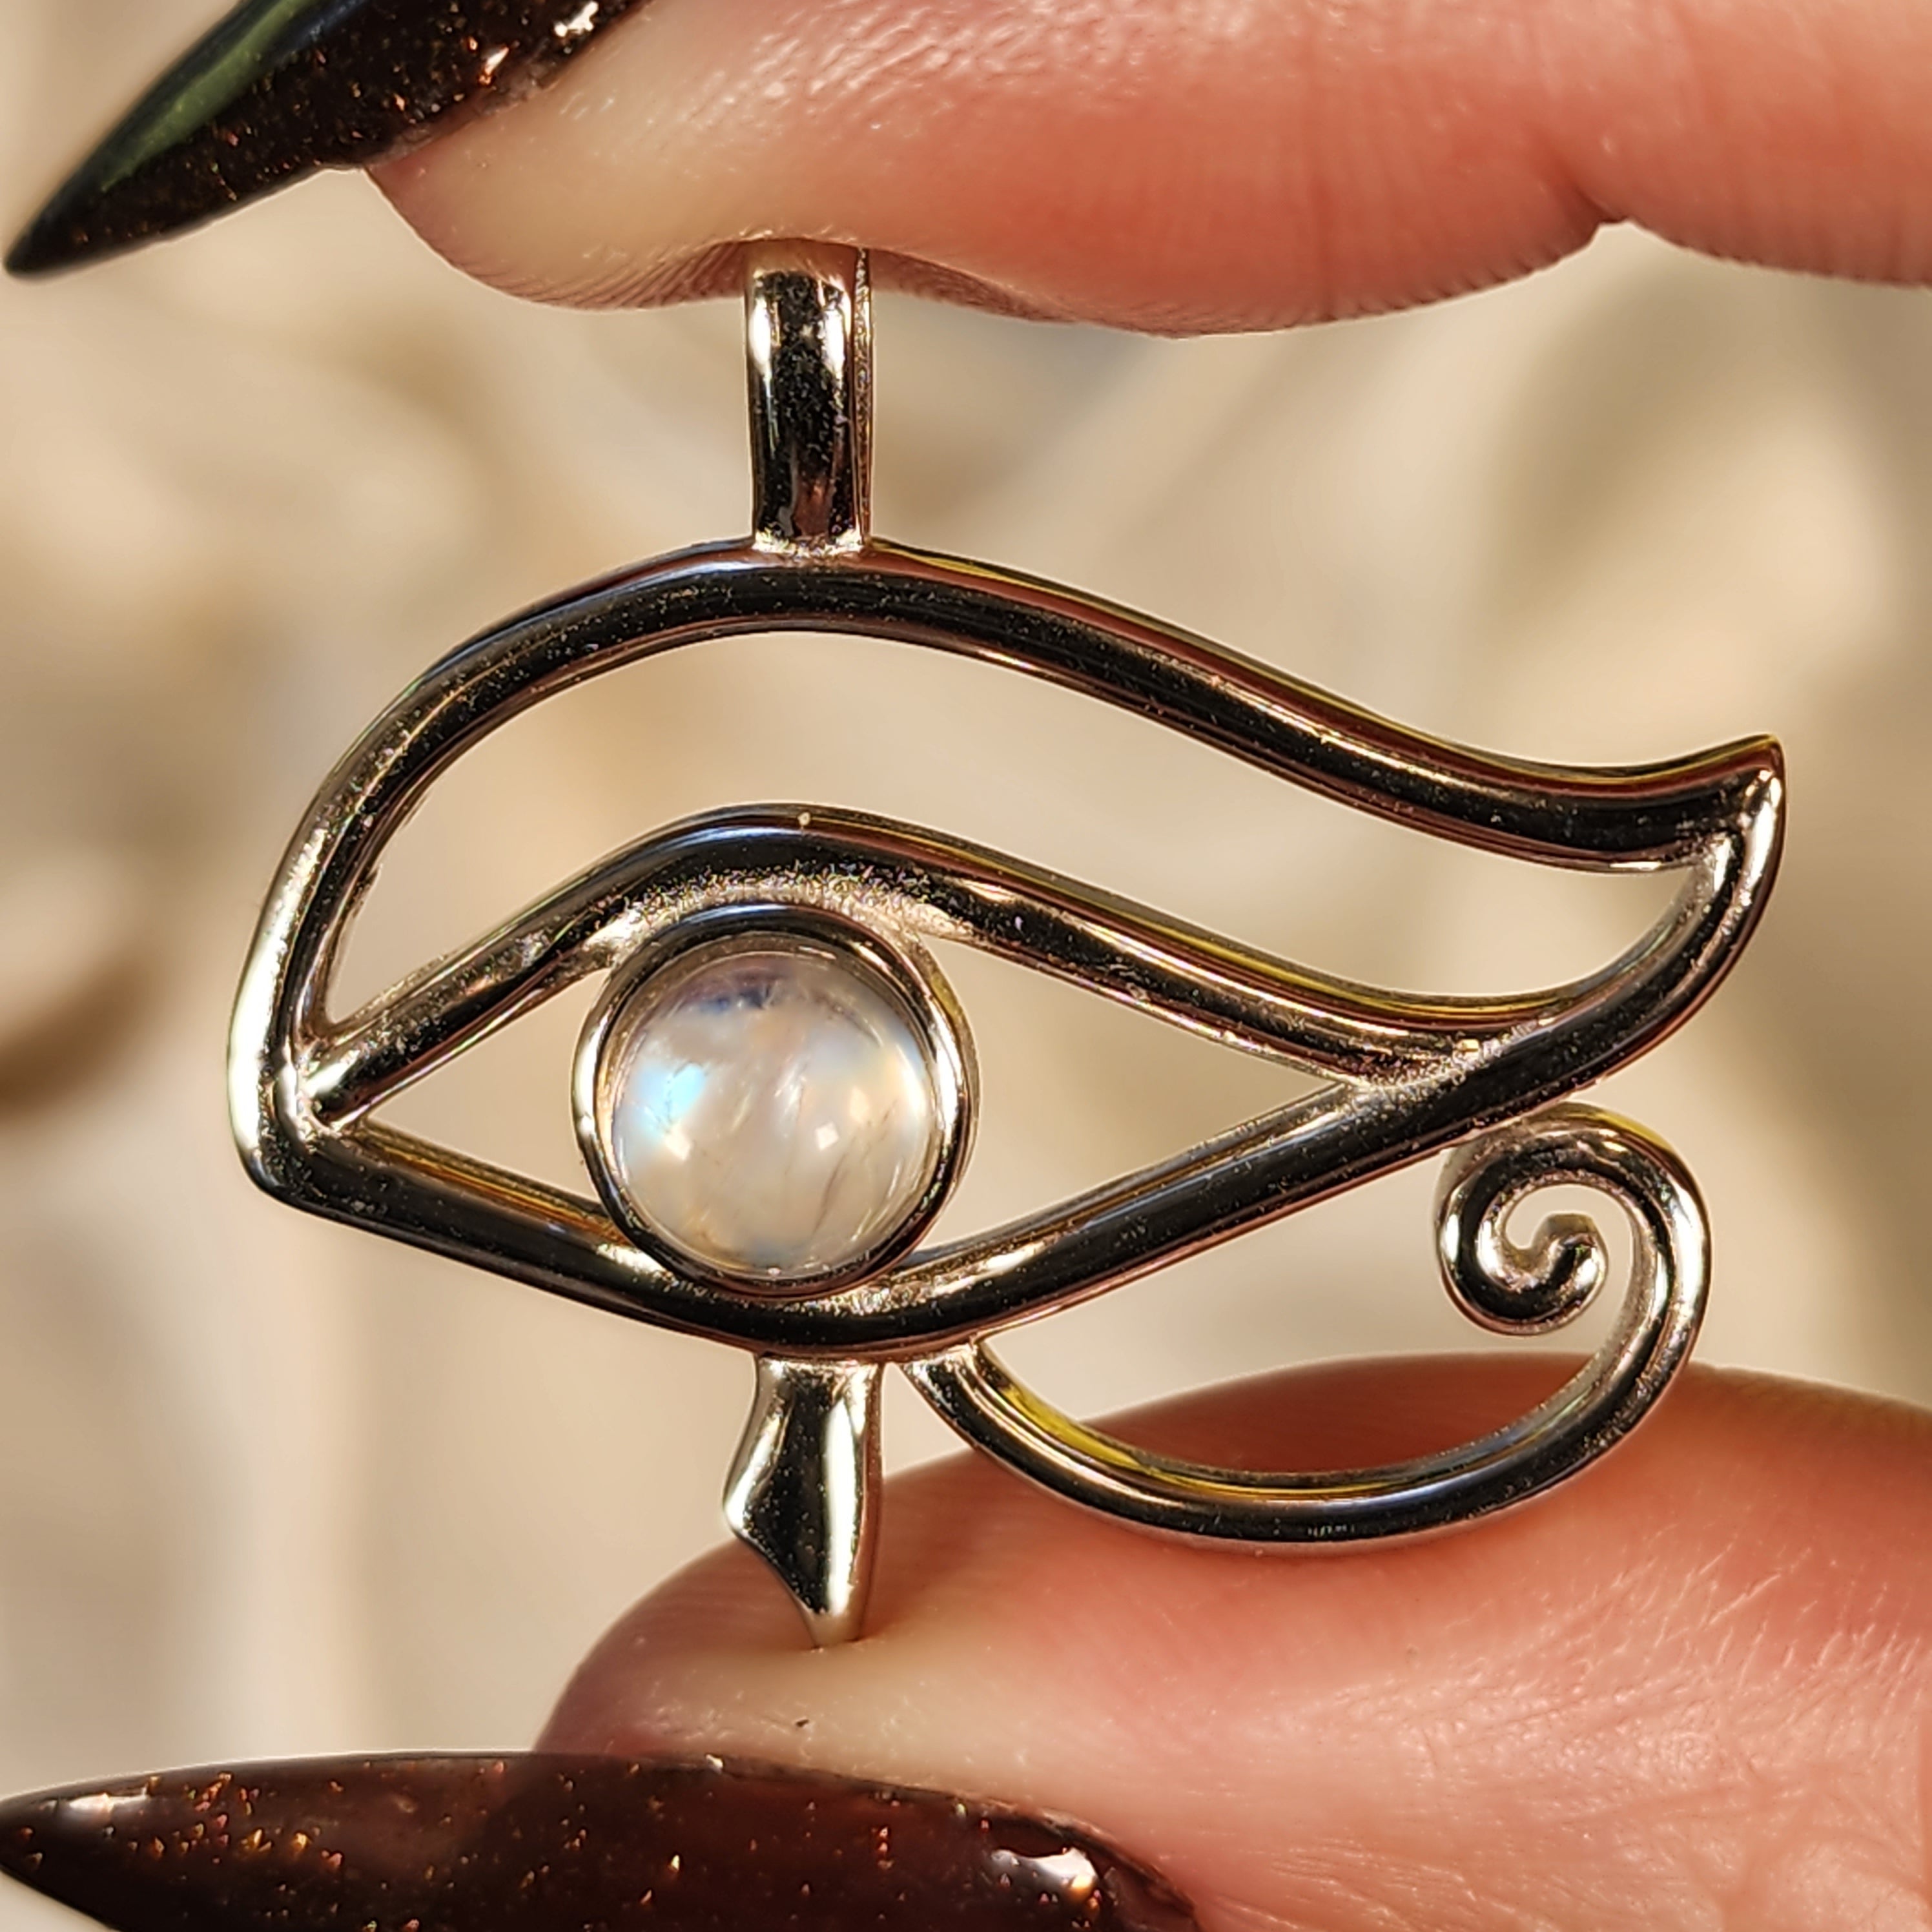 Rainbow Moonstone Eye of Horus Amulet Pendant .925 Silver for New Beginnings, Luck and Health